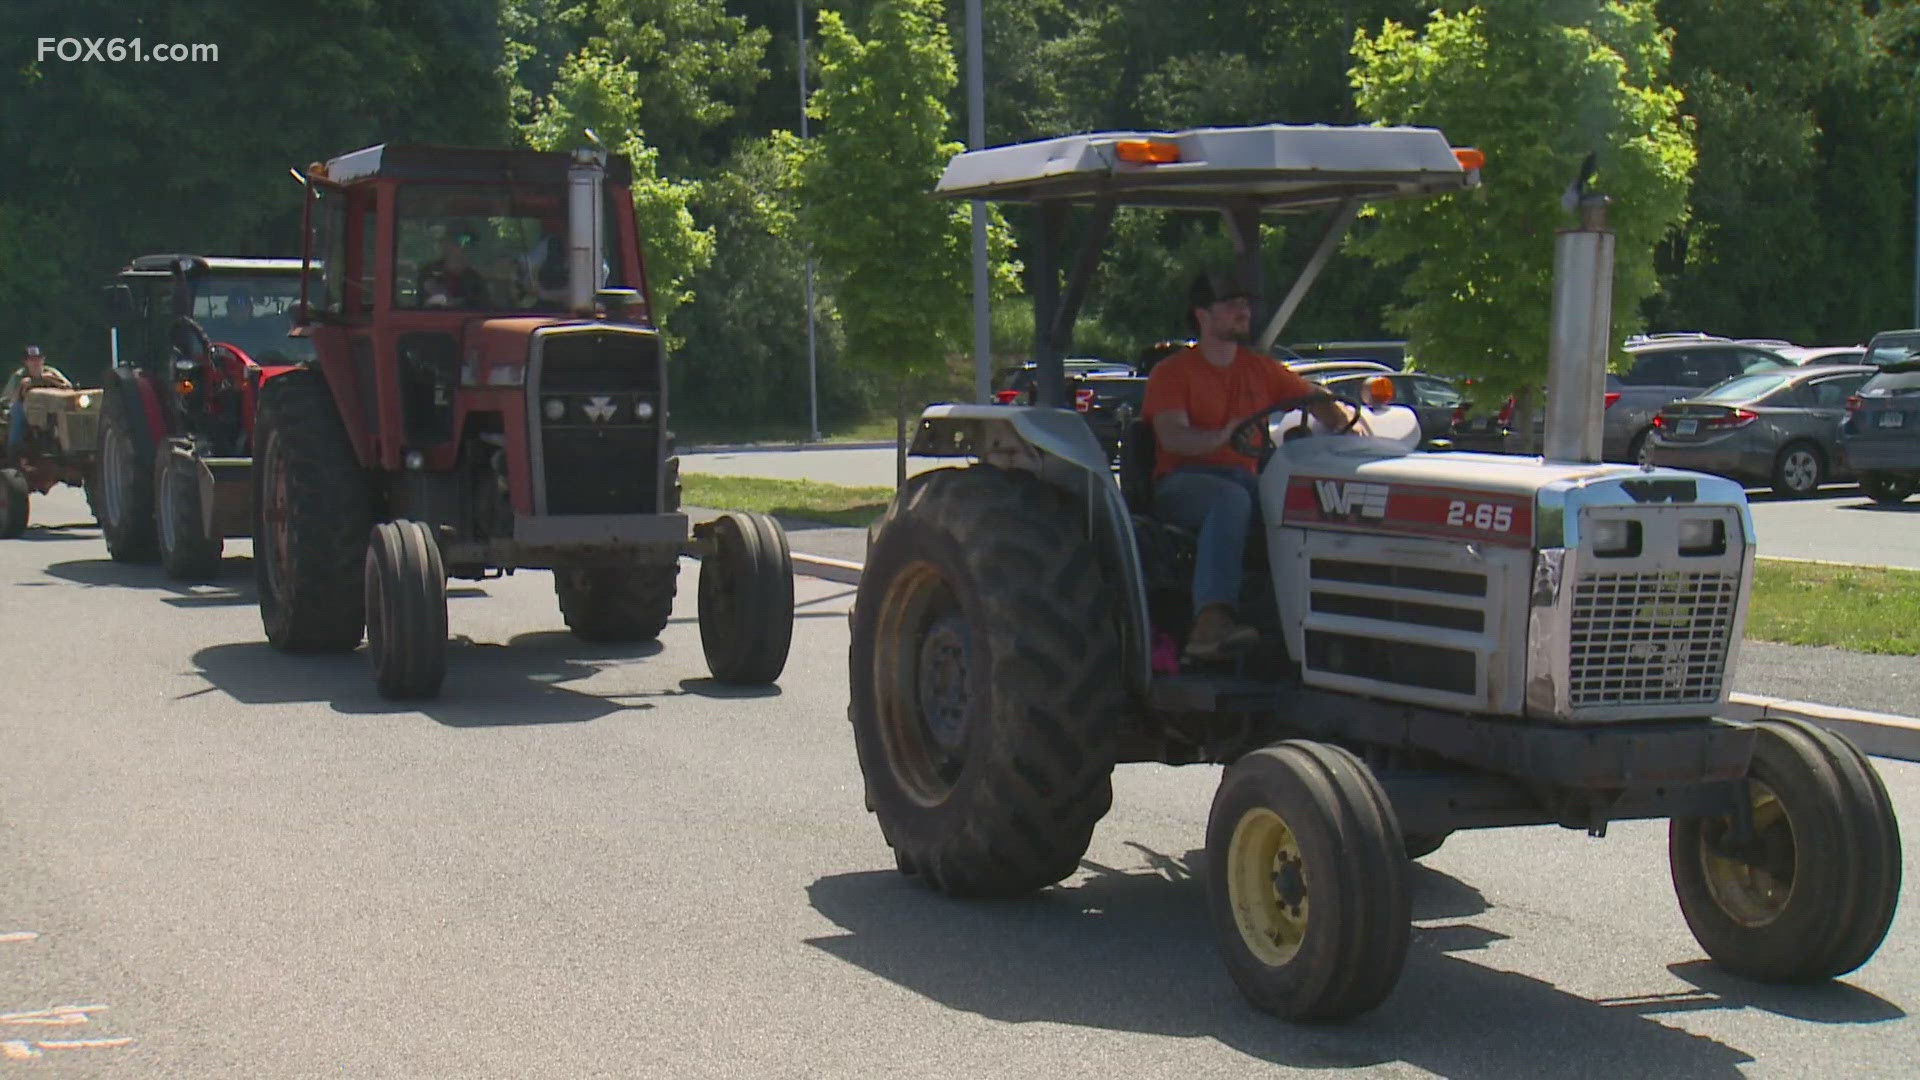 Here's a phrase you don't hear often - Drive Your Tractor to School Day. Well, it happens every year in Woodbury. Forty students rolled in on Friday.